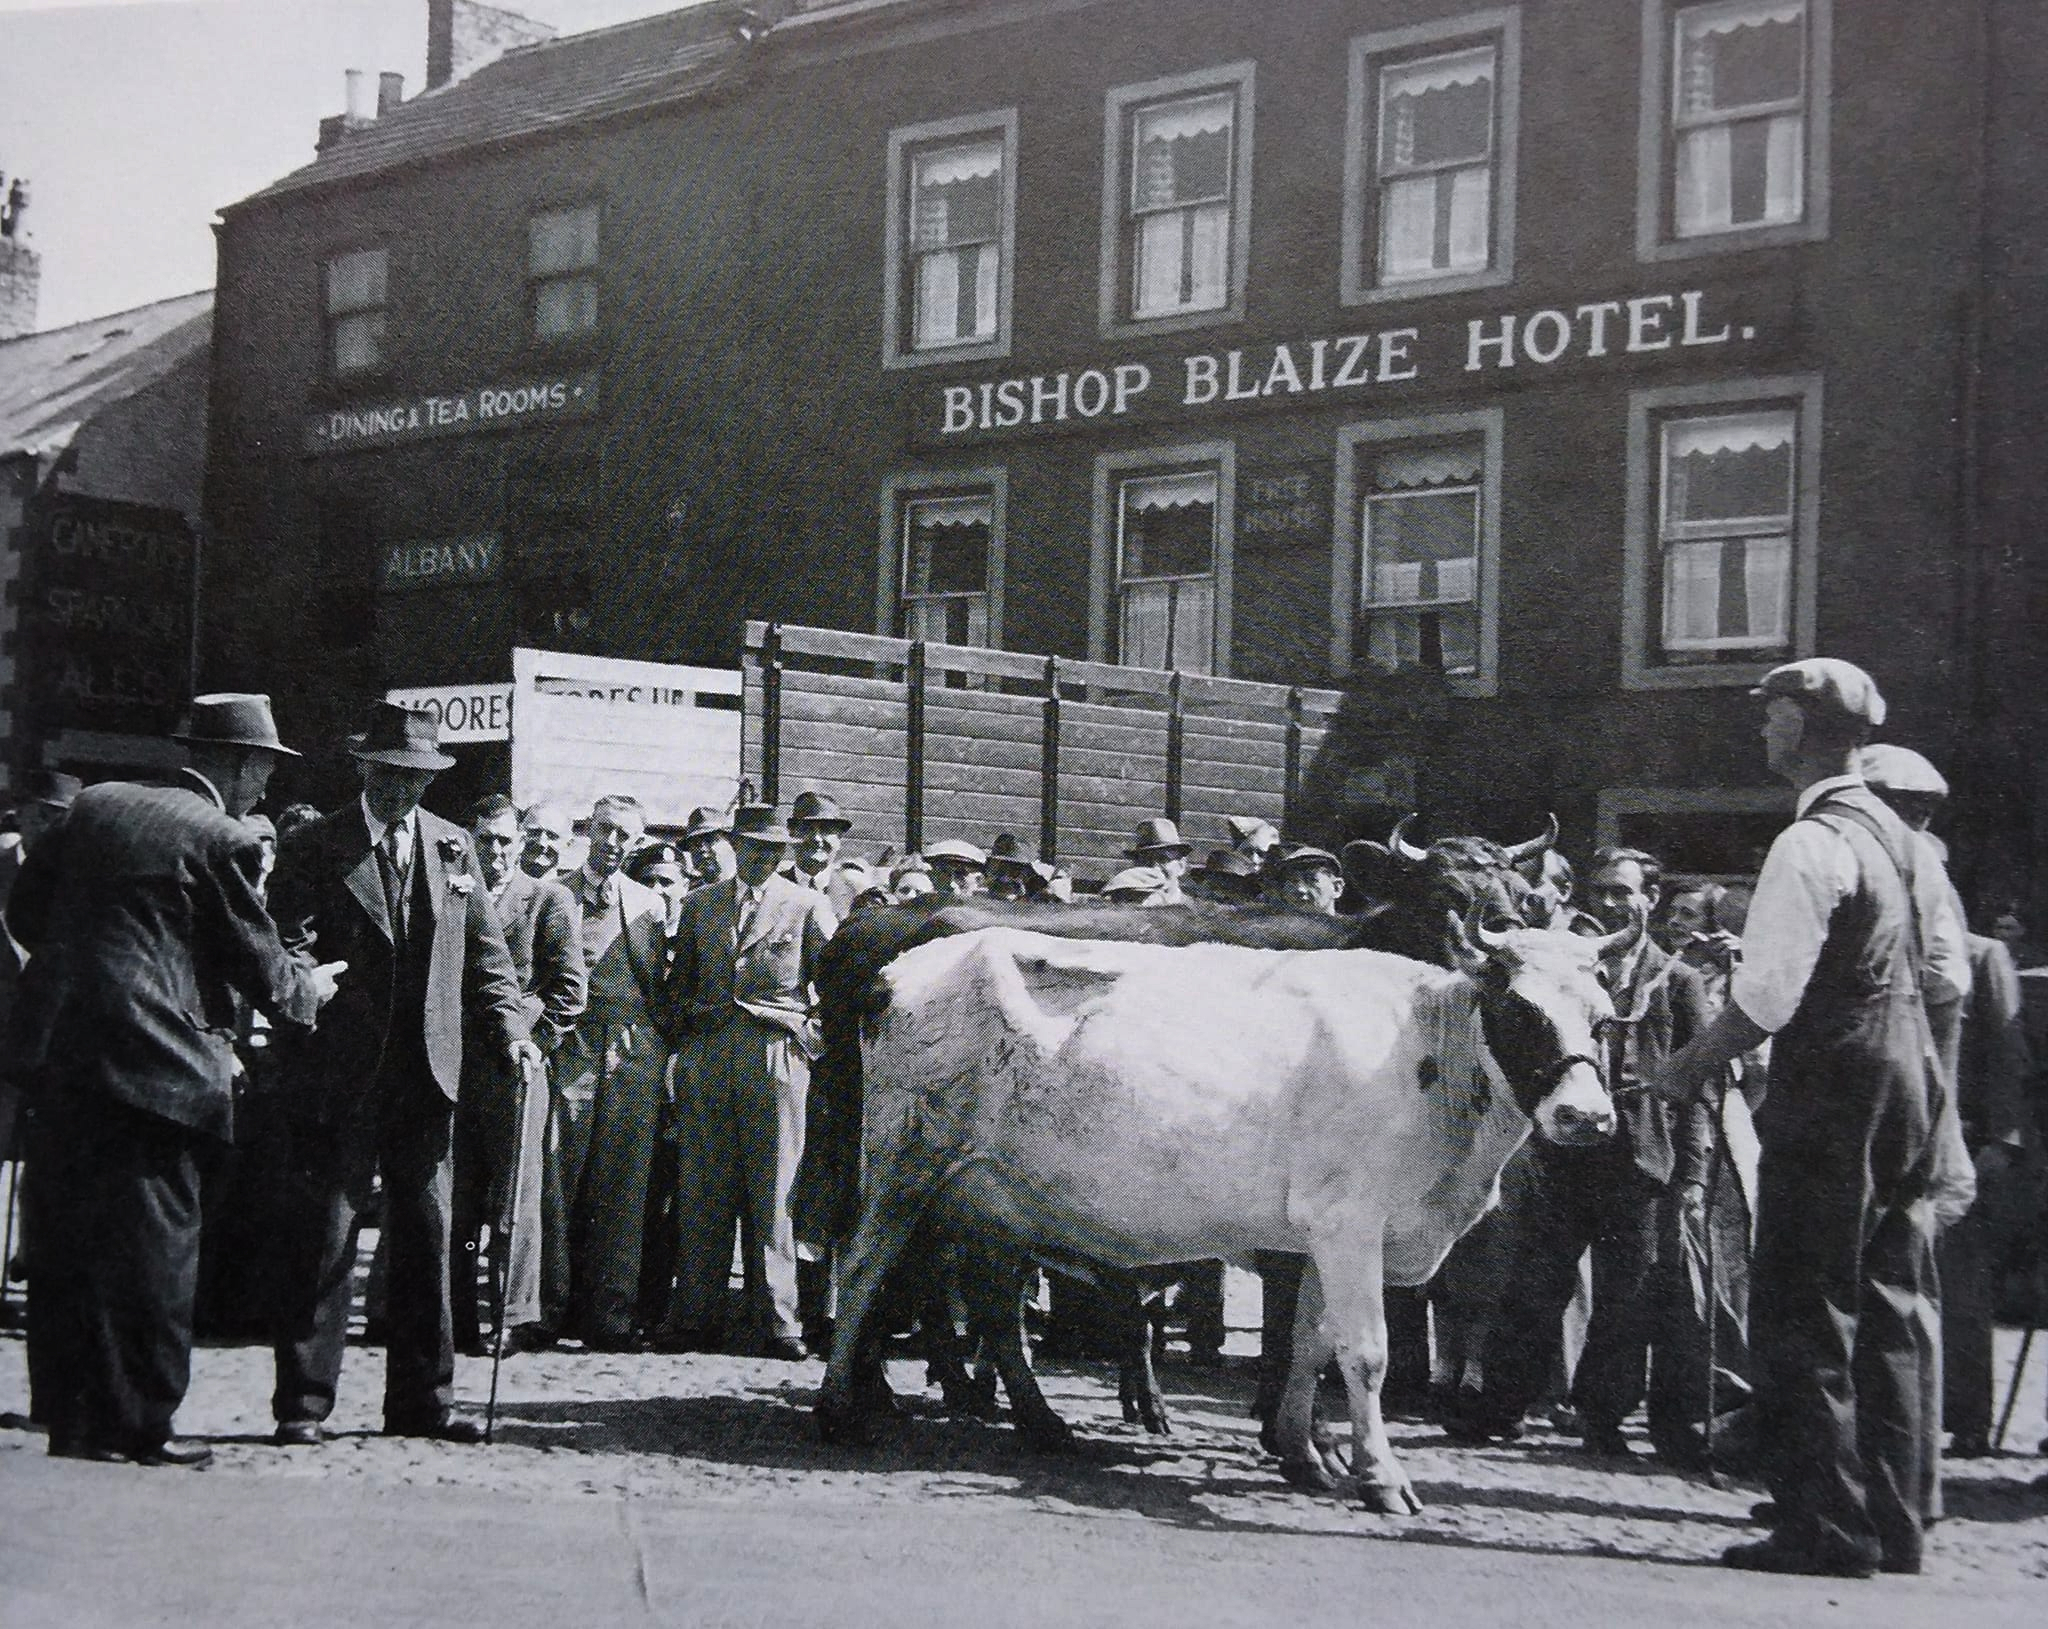 Richard Lawson, who was born at the Good Intent, is the tall chap at the back in the centre of the picture wearing a hat. It is market day outside the Bishop Blaize Inn in Richmond Market Place